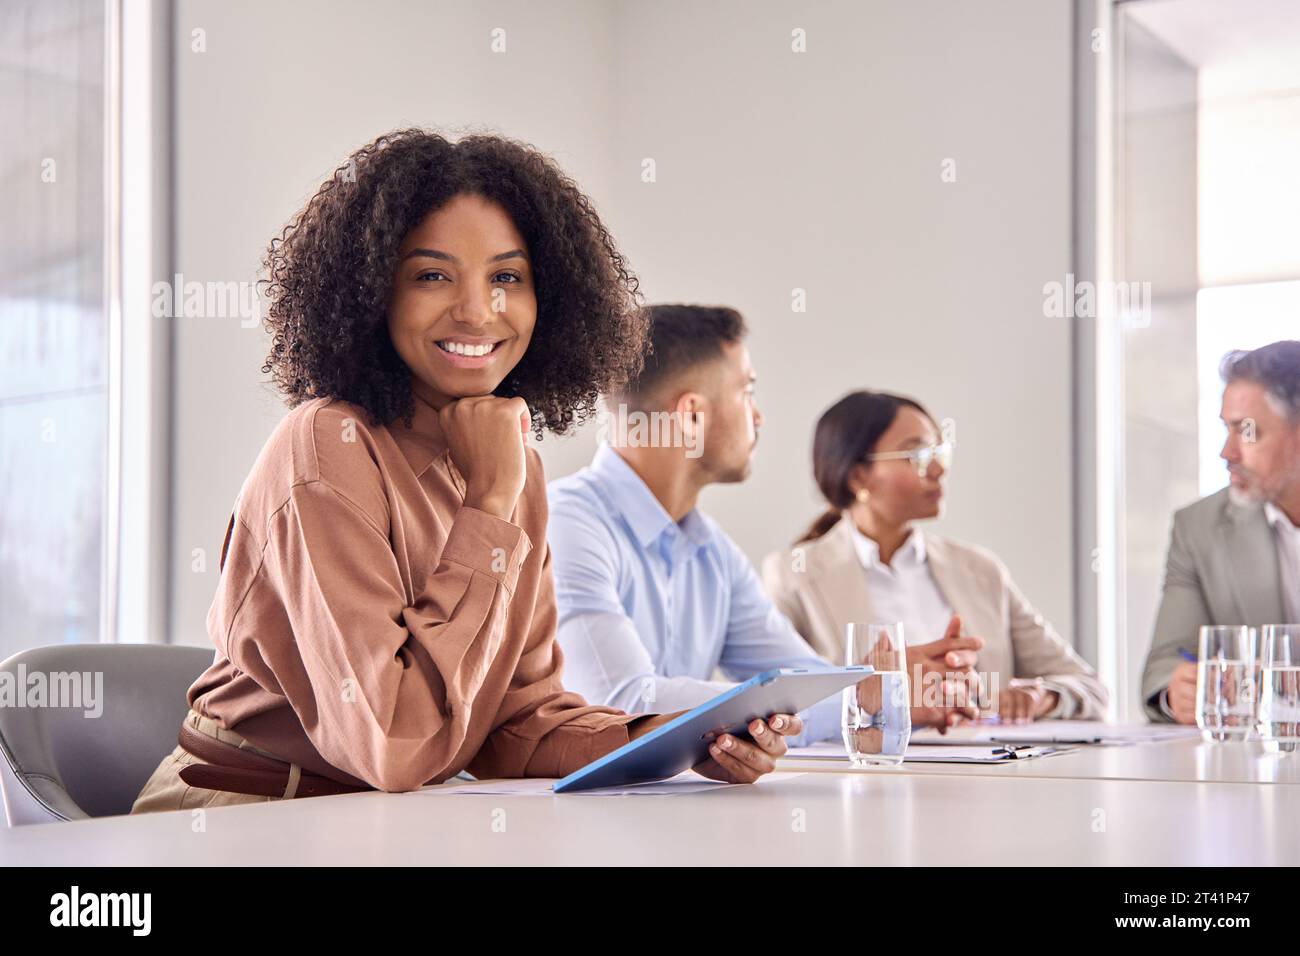 Portrait of happy young African American business woman at office meeting. Stock Photo